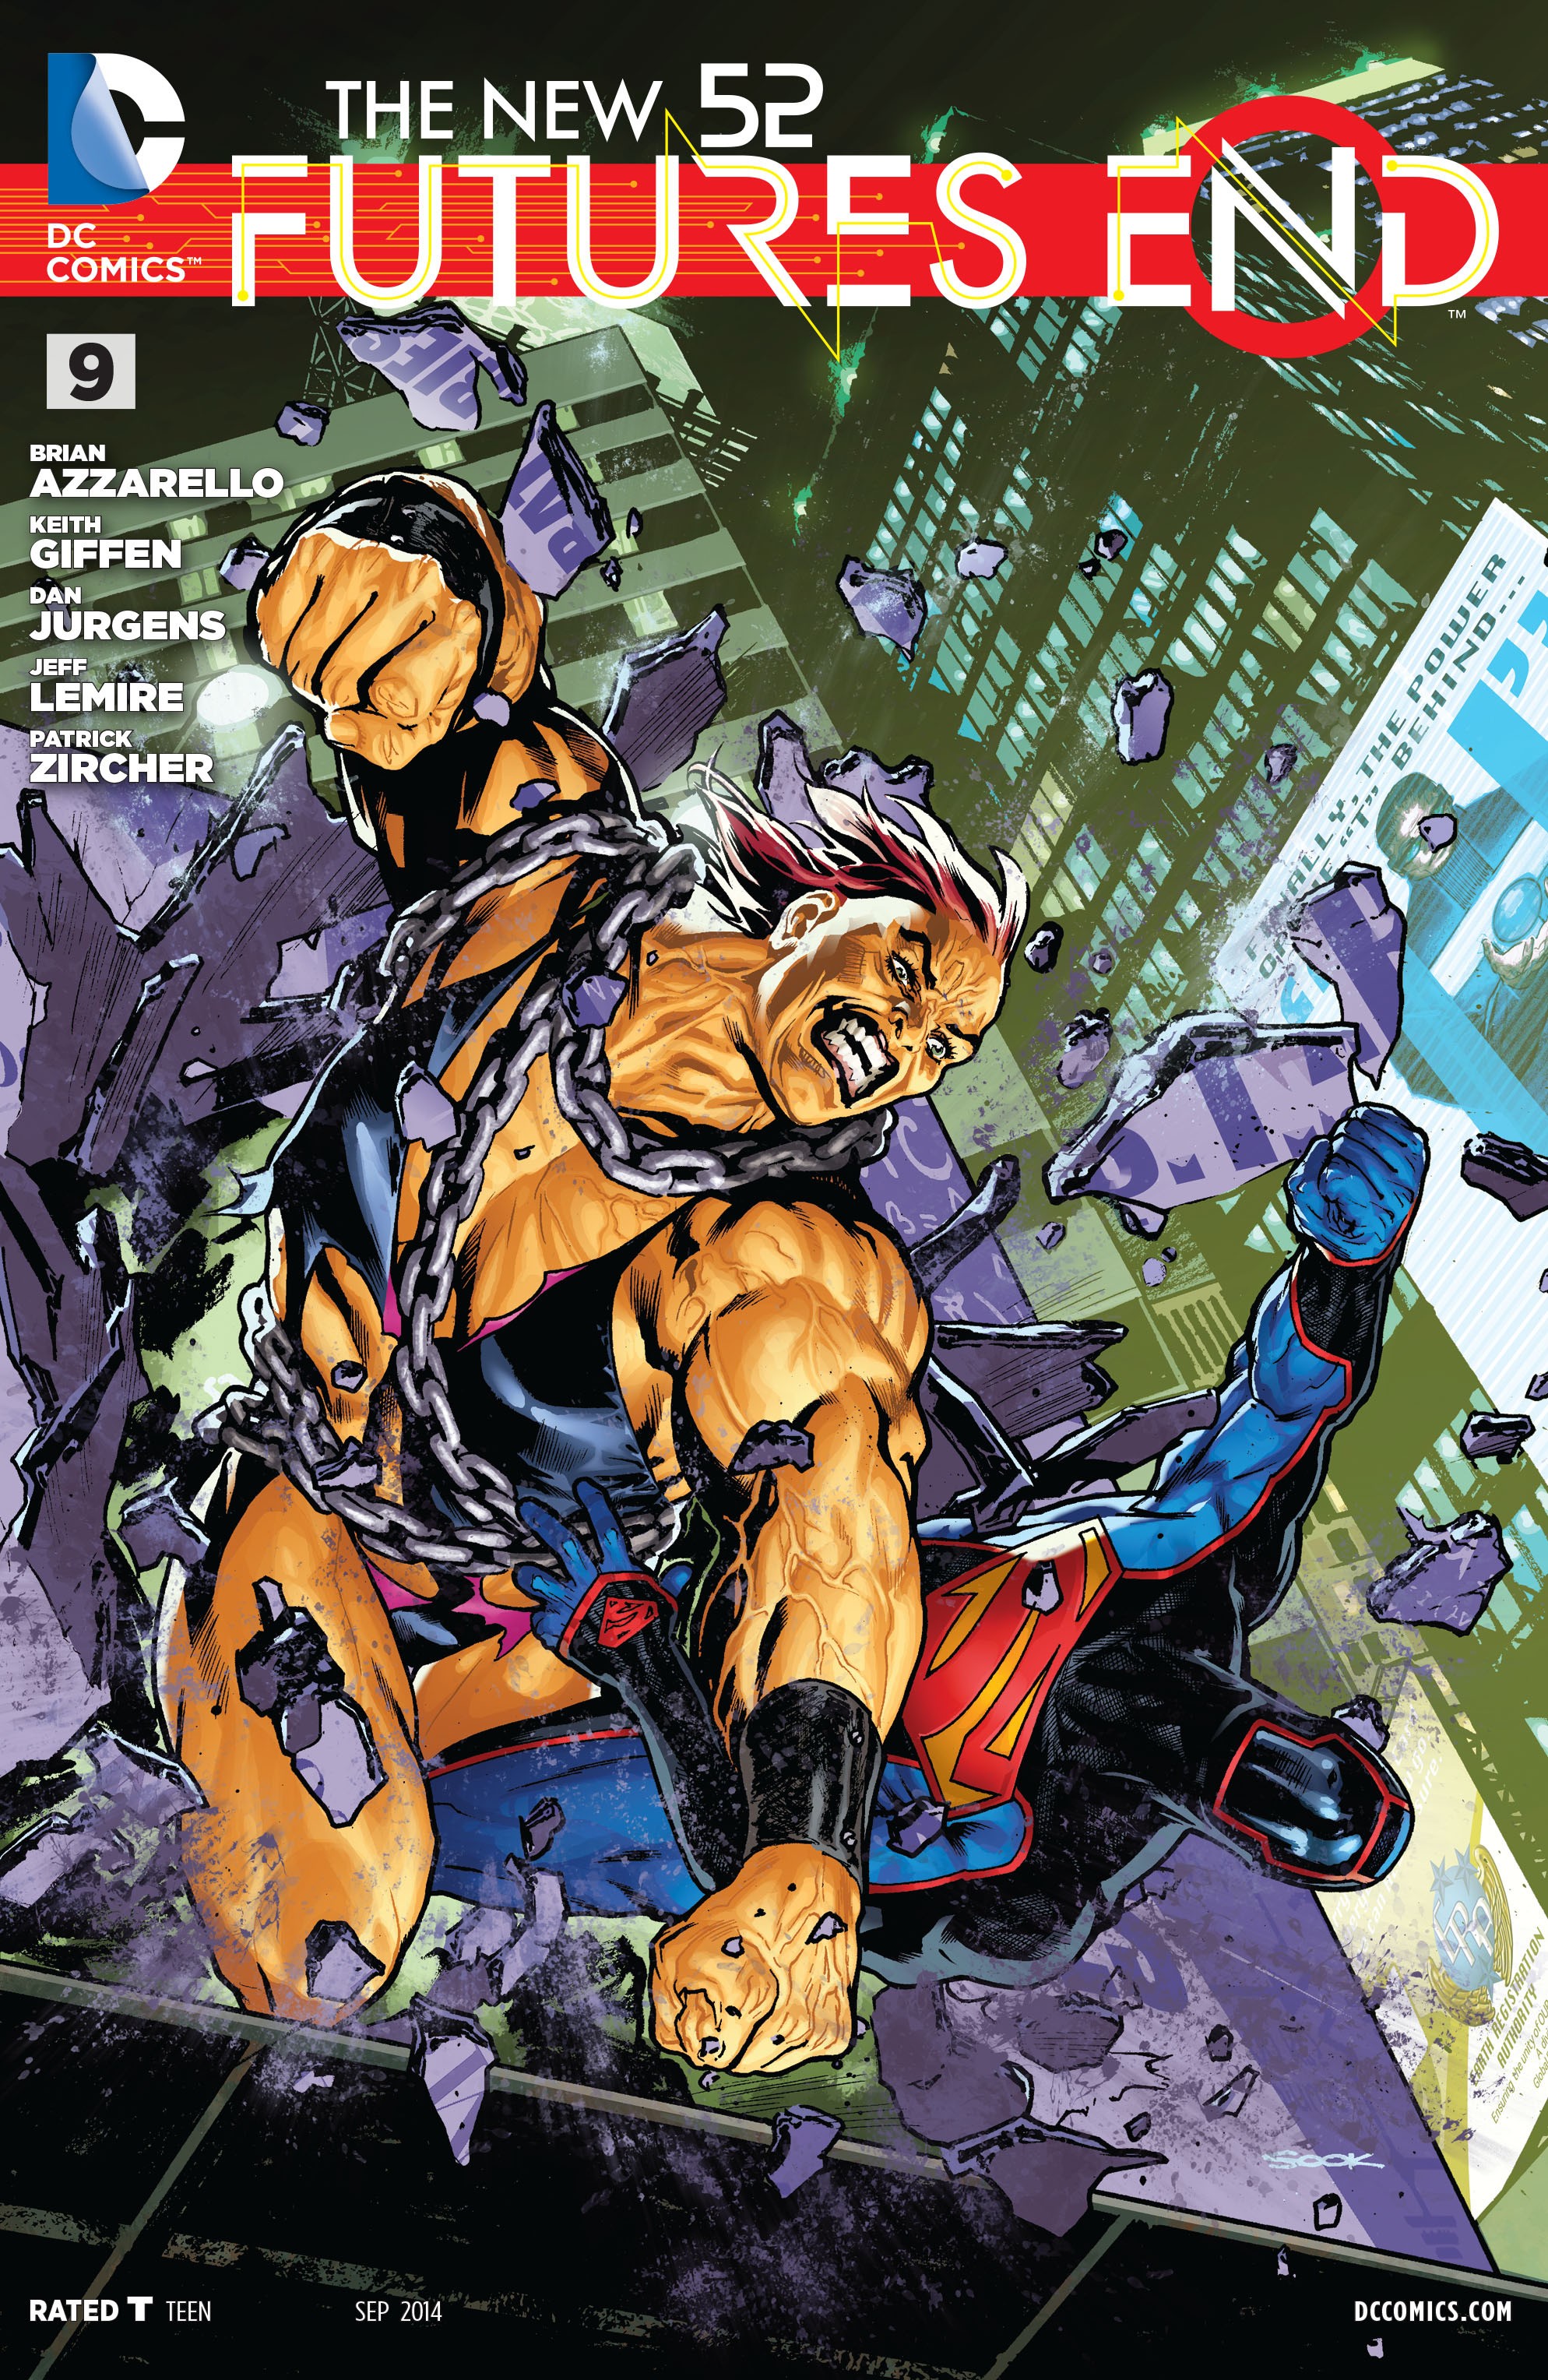 The New 52: Futures End Vol. 1 #9